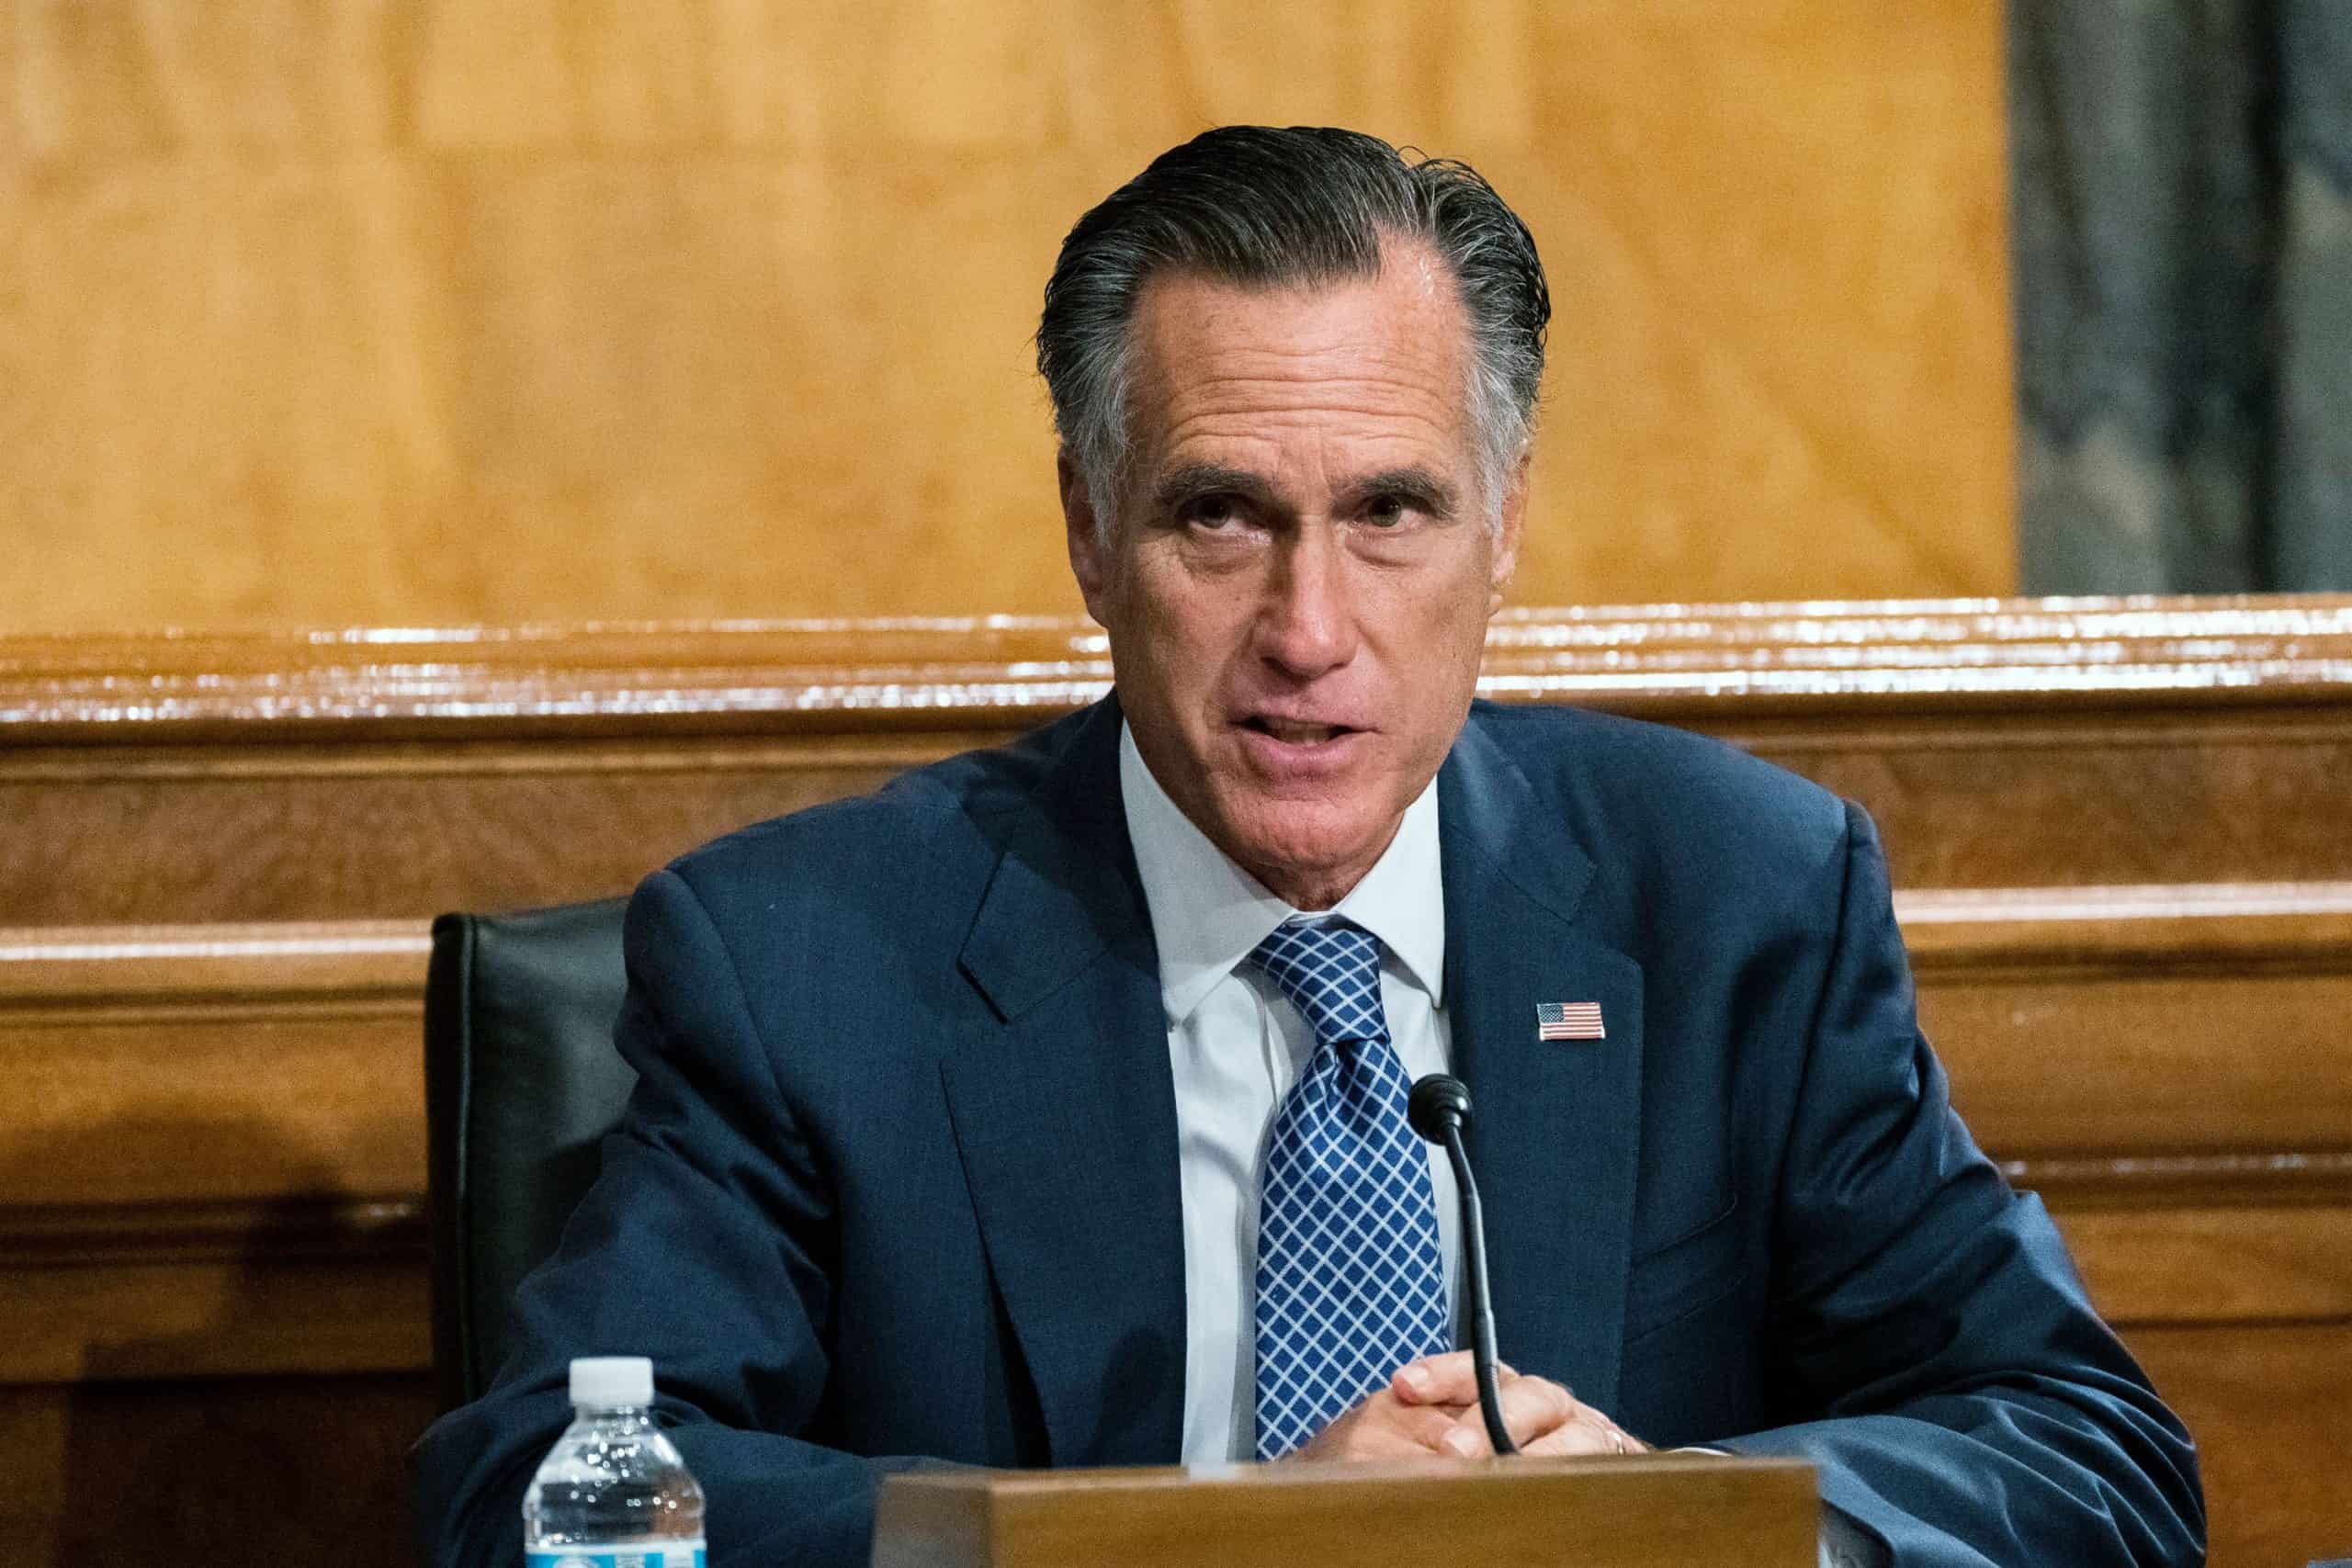 ‘An insurrection incited by the president’: Mitt Romney excoriates Trump